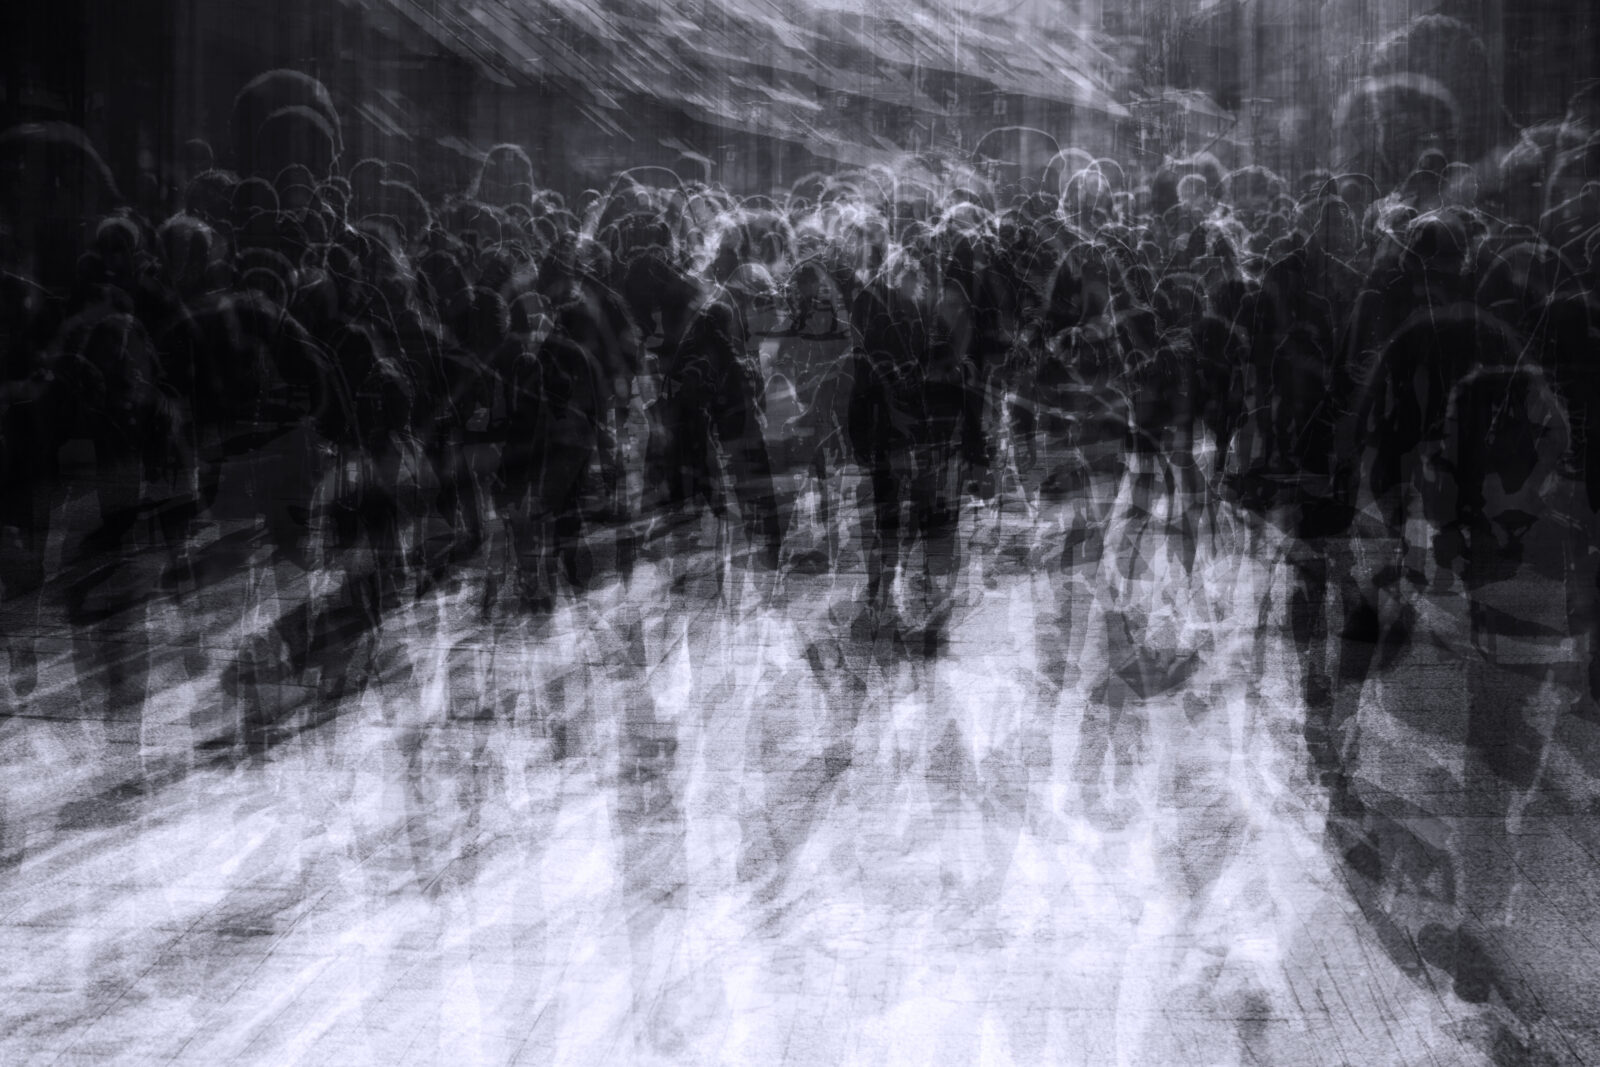 multiple exposure of people in overcrowded city resembling a zombie apocalypse